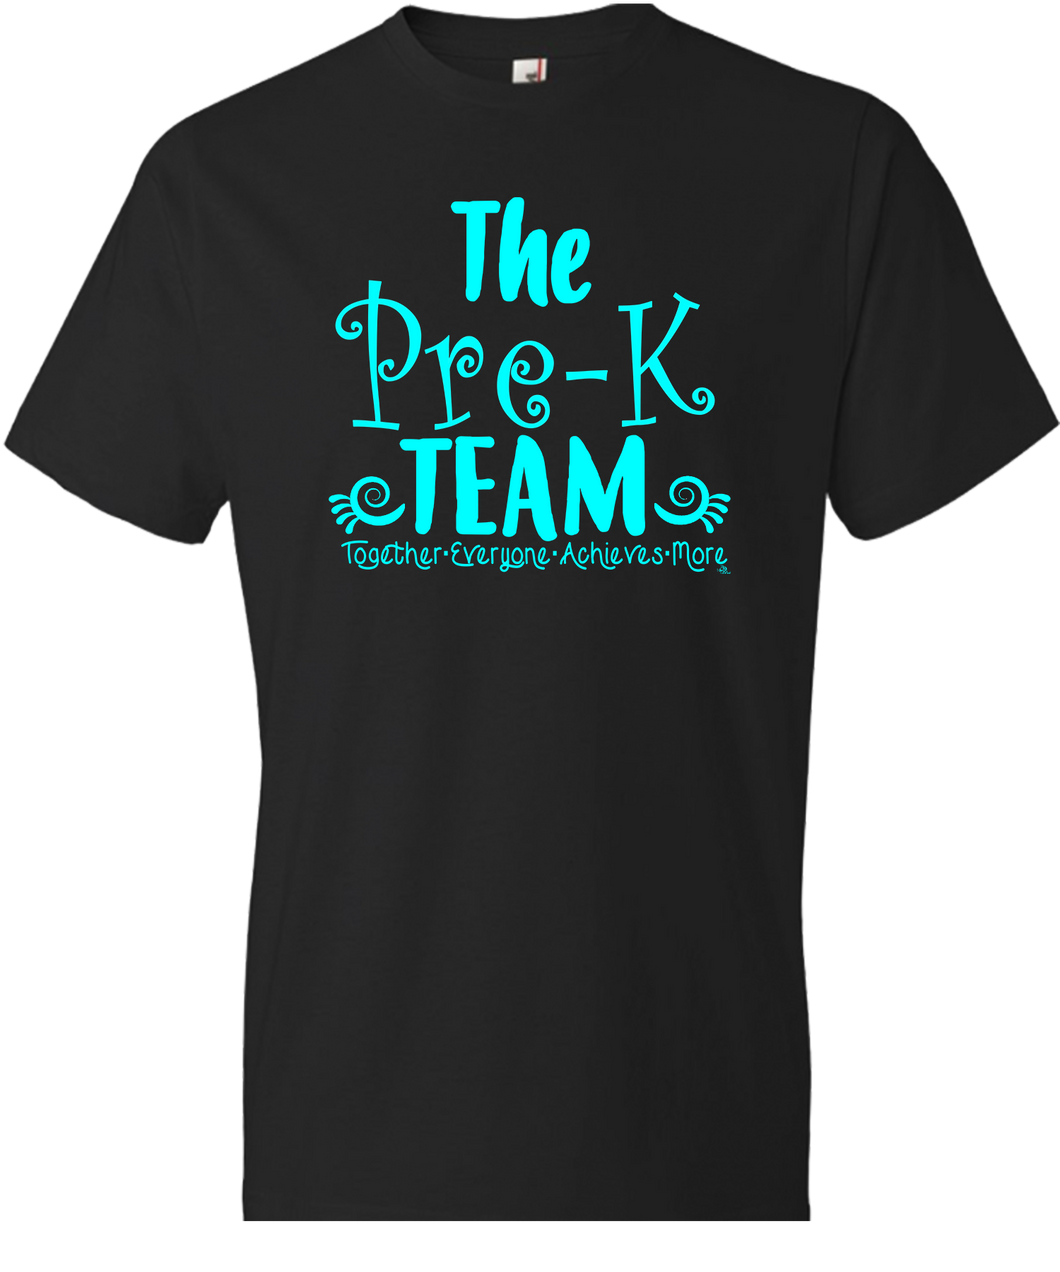 The Pre-K Team Grade Level Tee (ONLY Size Small, 2X)